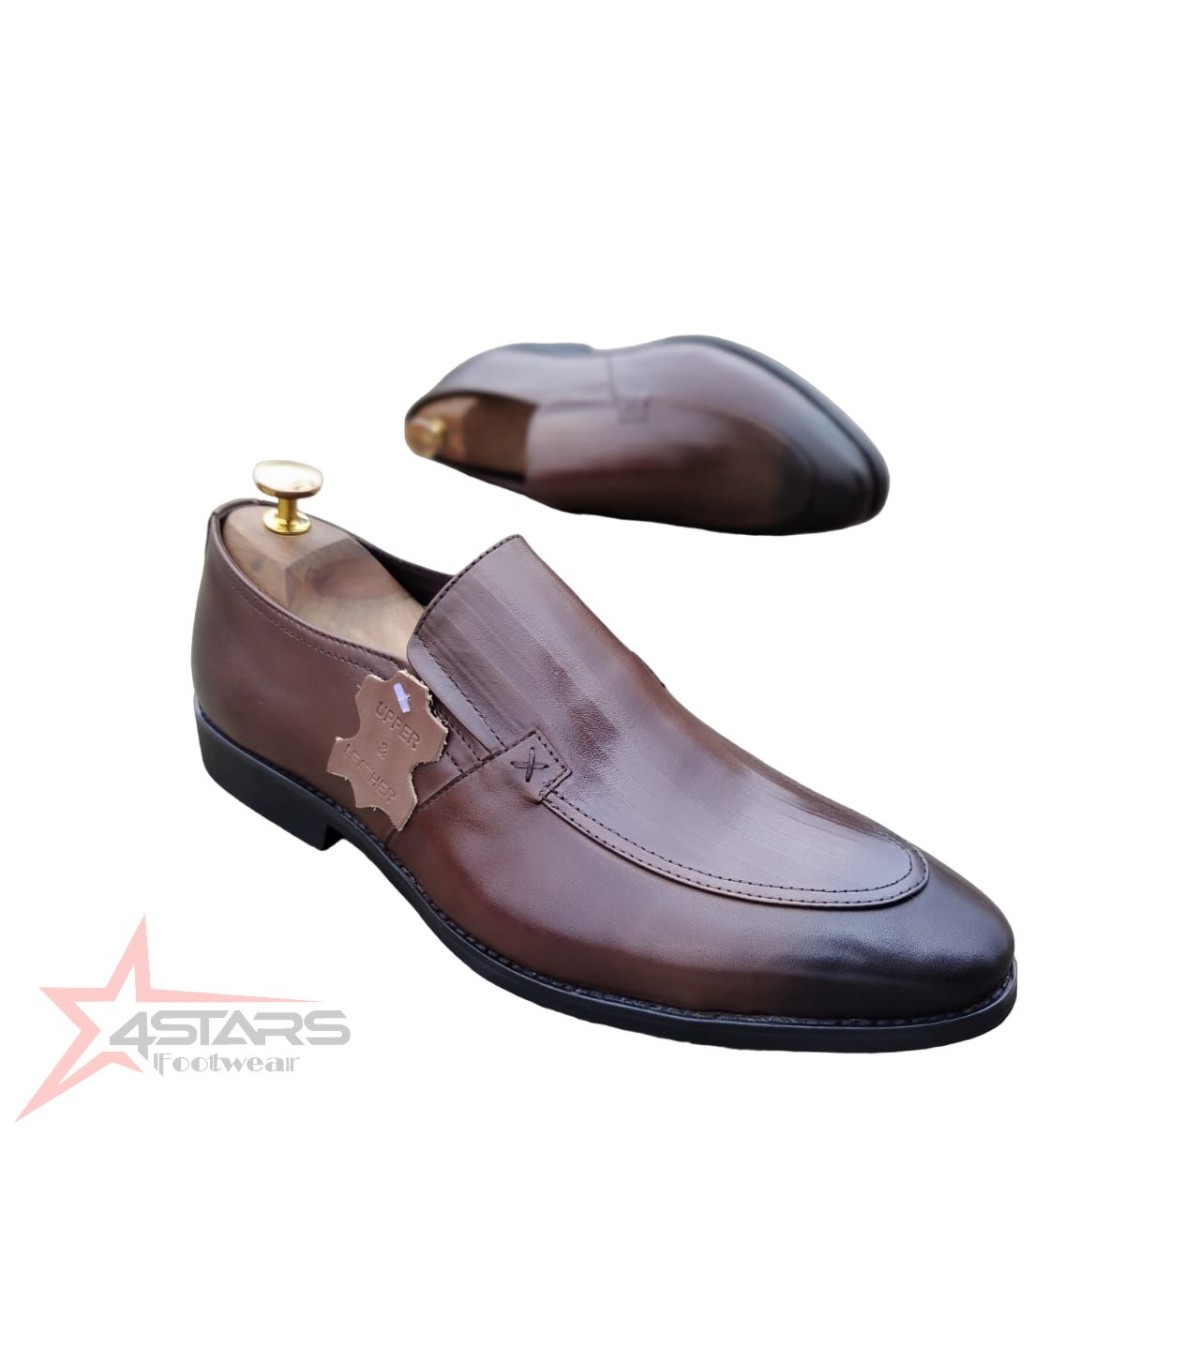 SM Genuine Leather Slip On Formal Shoes - Coffee